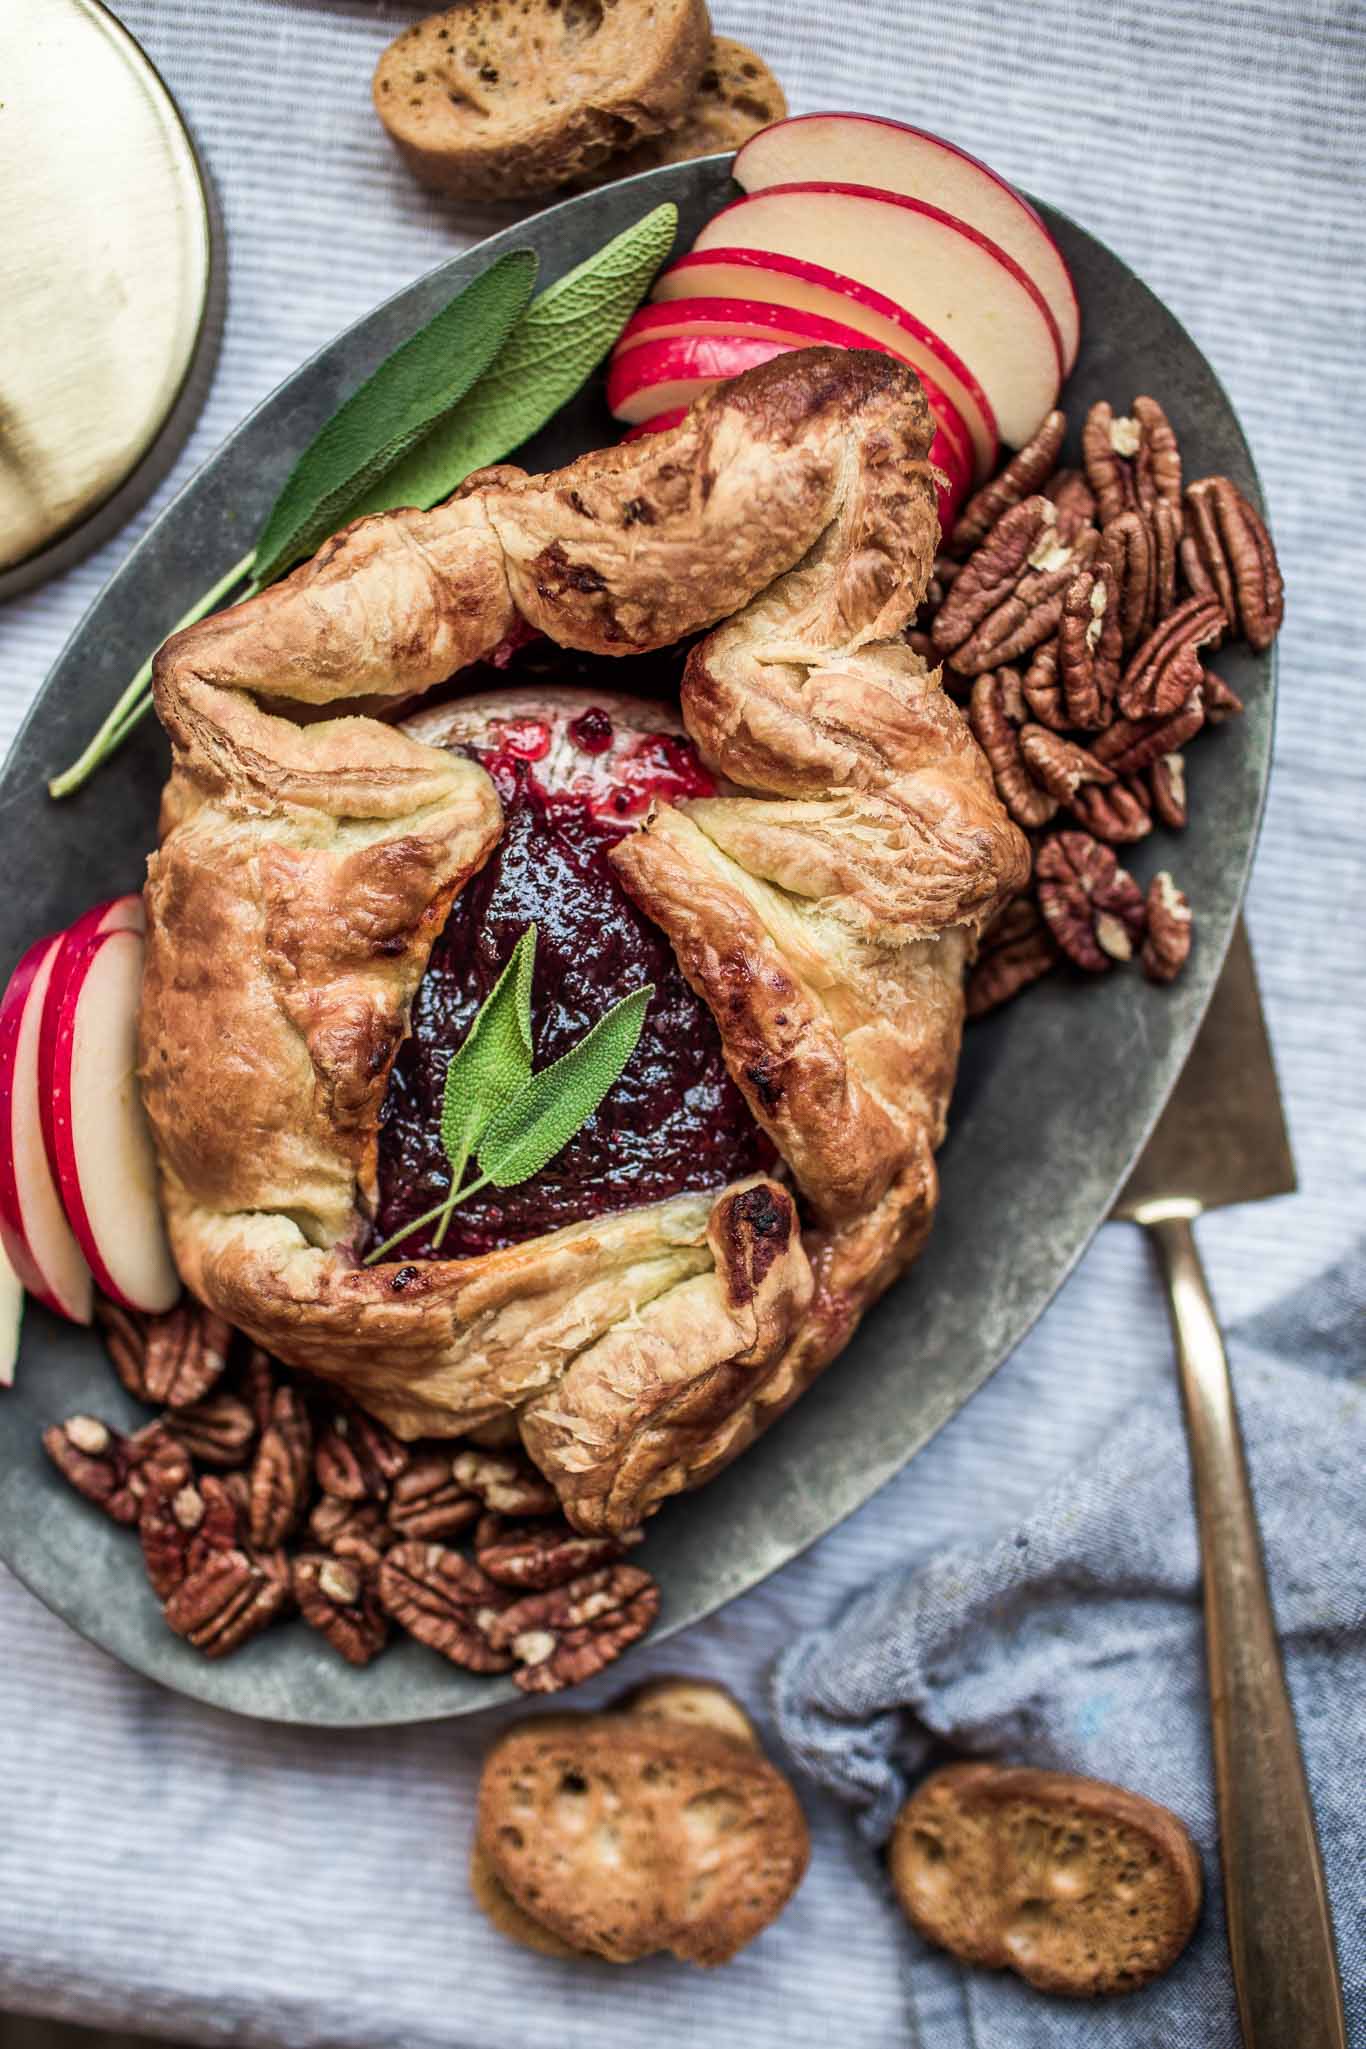 Overhead shot of baked brie in puff pastry with red currant fruit spread.